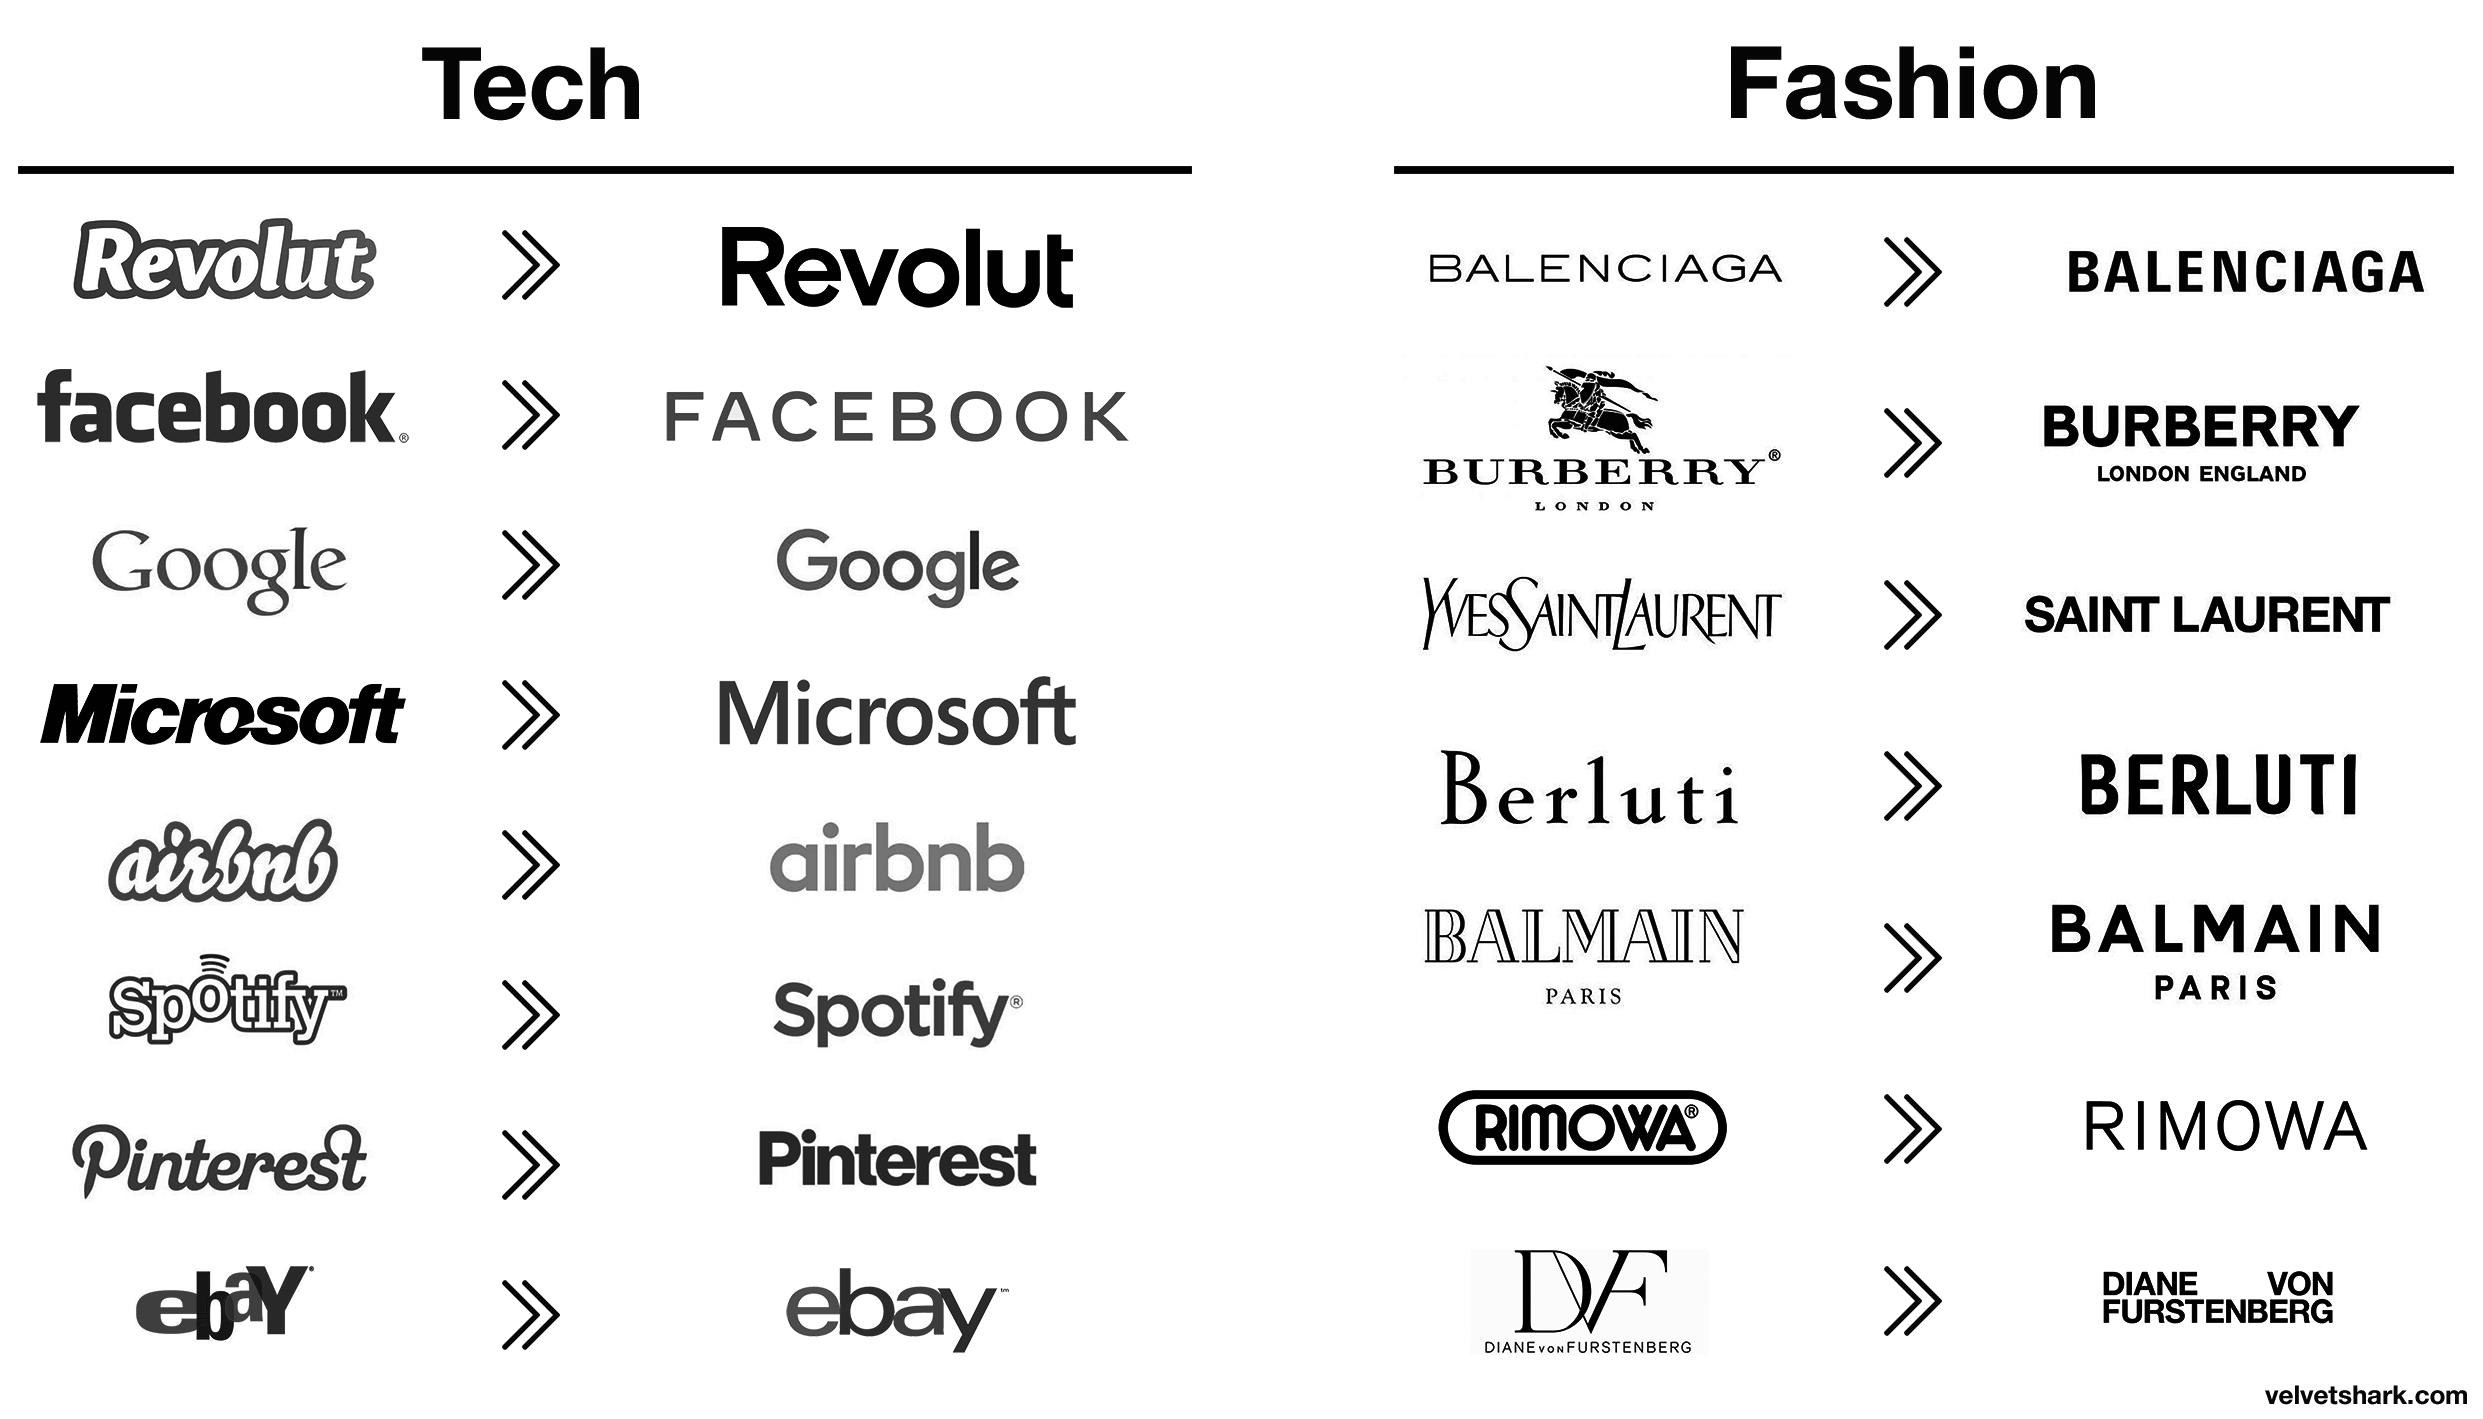 Changes in tech and fashion brand logos